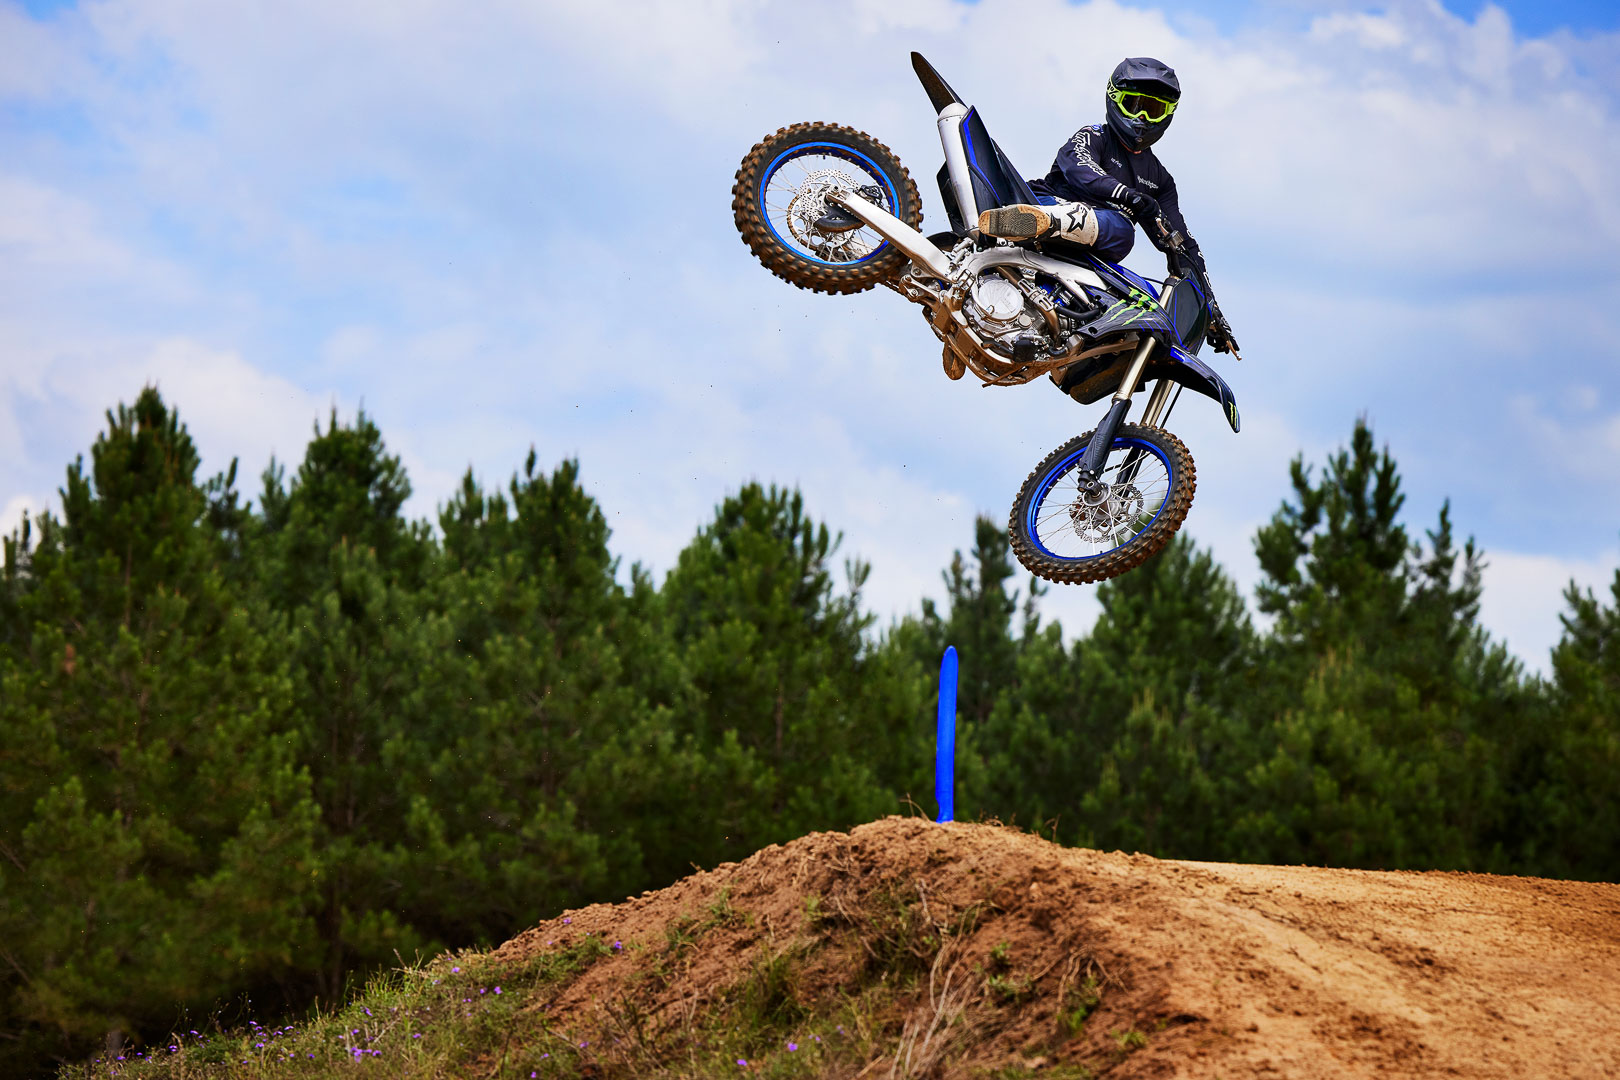 Free download 2022 Yamaha YZ450F First Look 5 Fast Facts 30 Photo [1620x1080] for your Desktop, Mobile & Tablet. Explore Yz450F Wallpaper